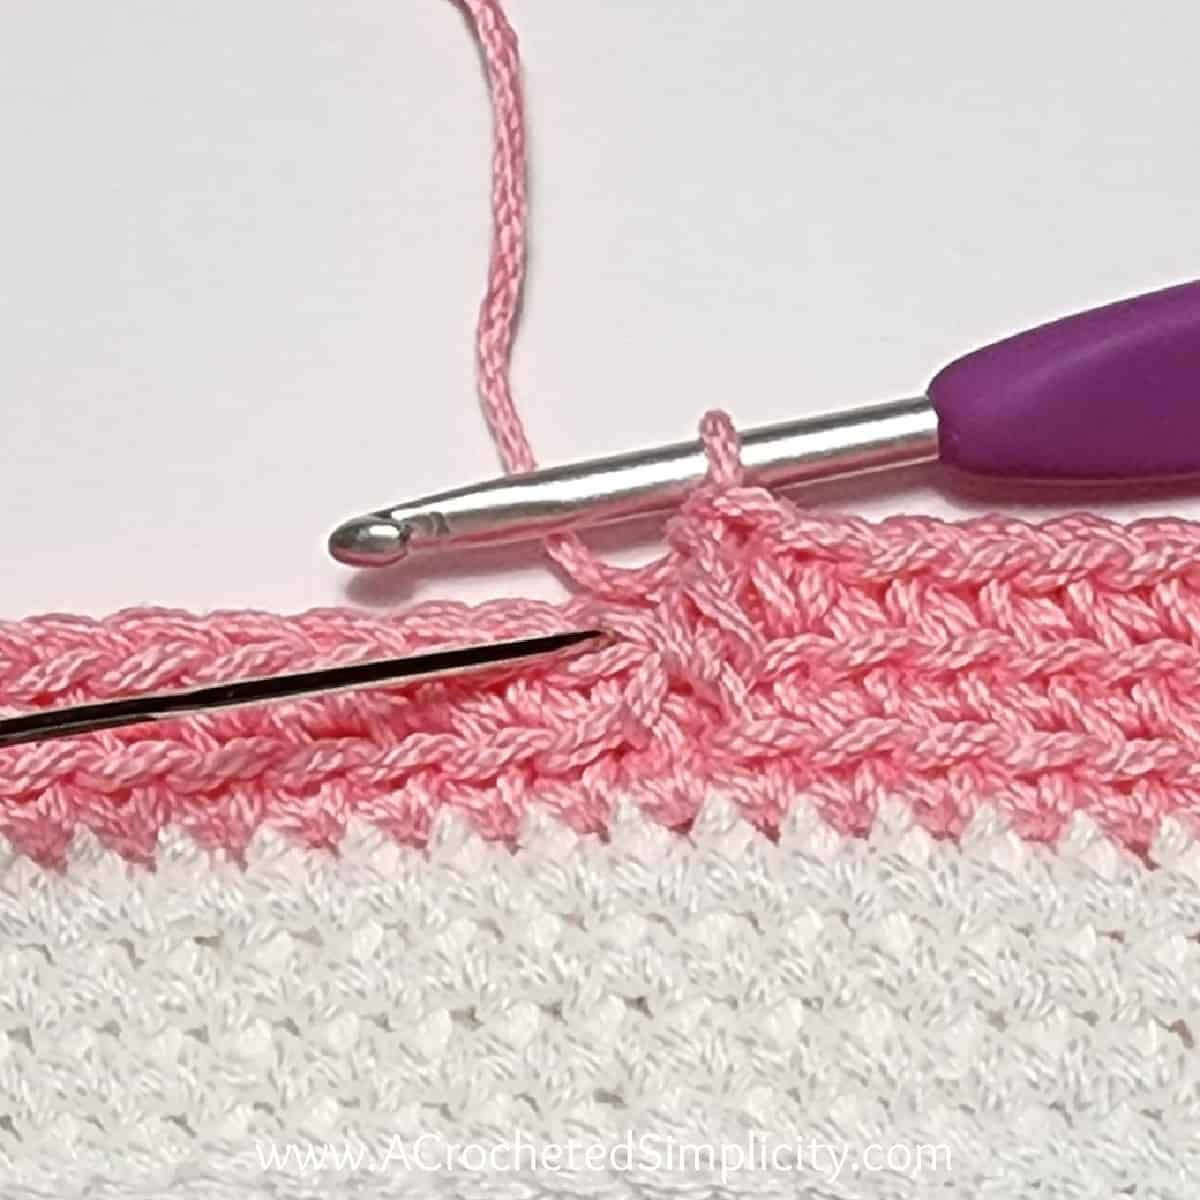 Crochet Valentine's Day treat bag tutorial photo in pink and white yarn showing where to work the next stitch in back loop only.